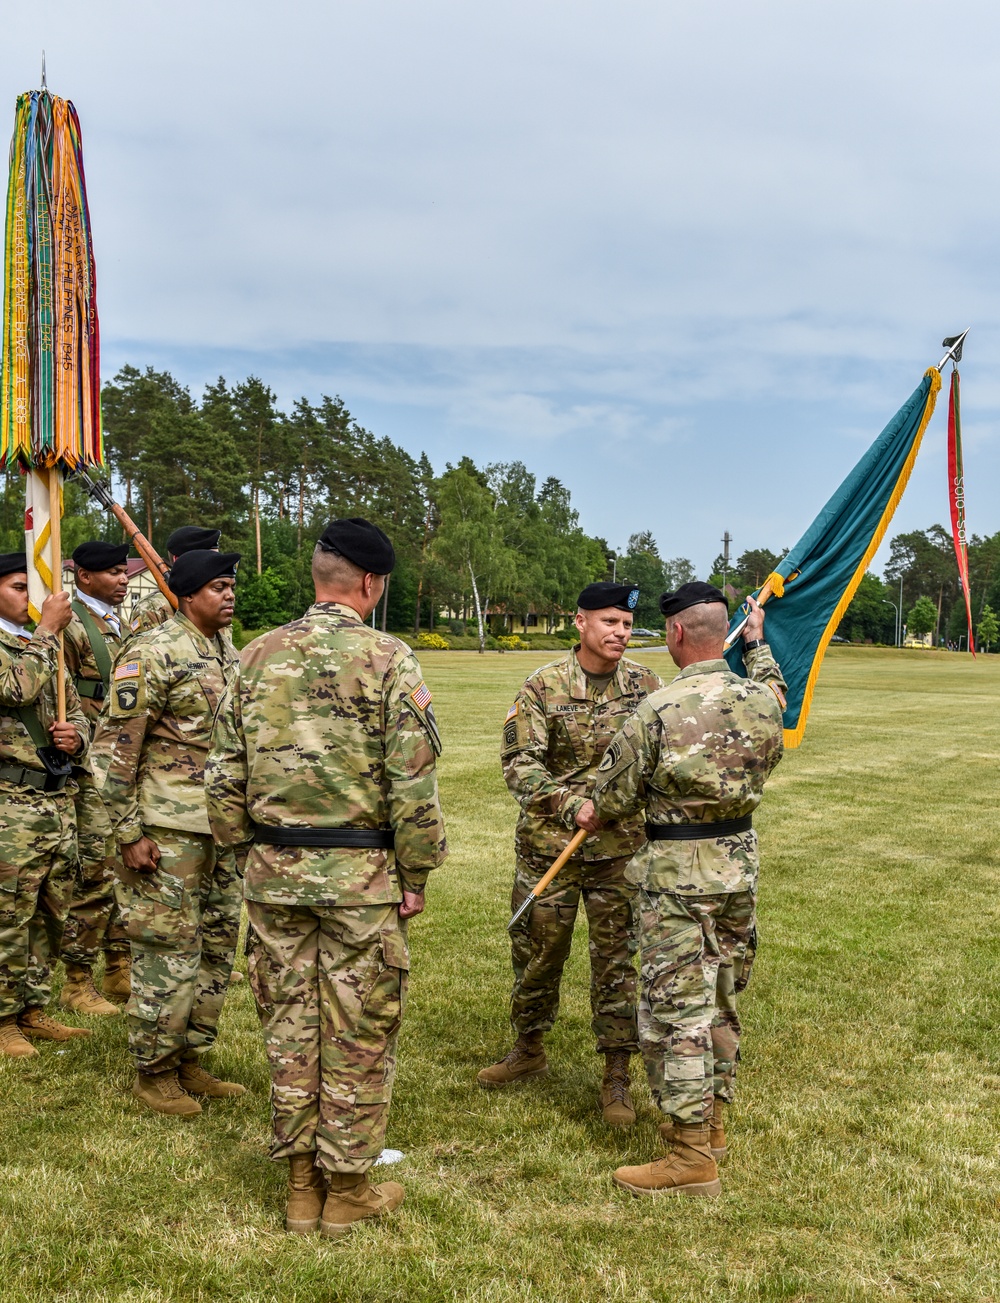 Brig. Gen. Christopher LaNeve passes 7th ATC colors to Lt. Gen. Christopher Cavoli in Change of Command ceremony